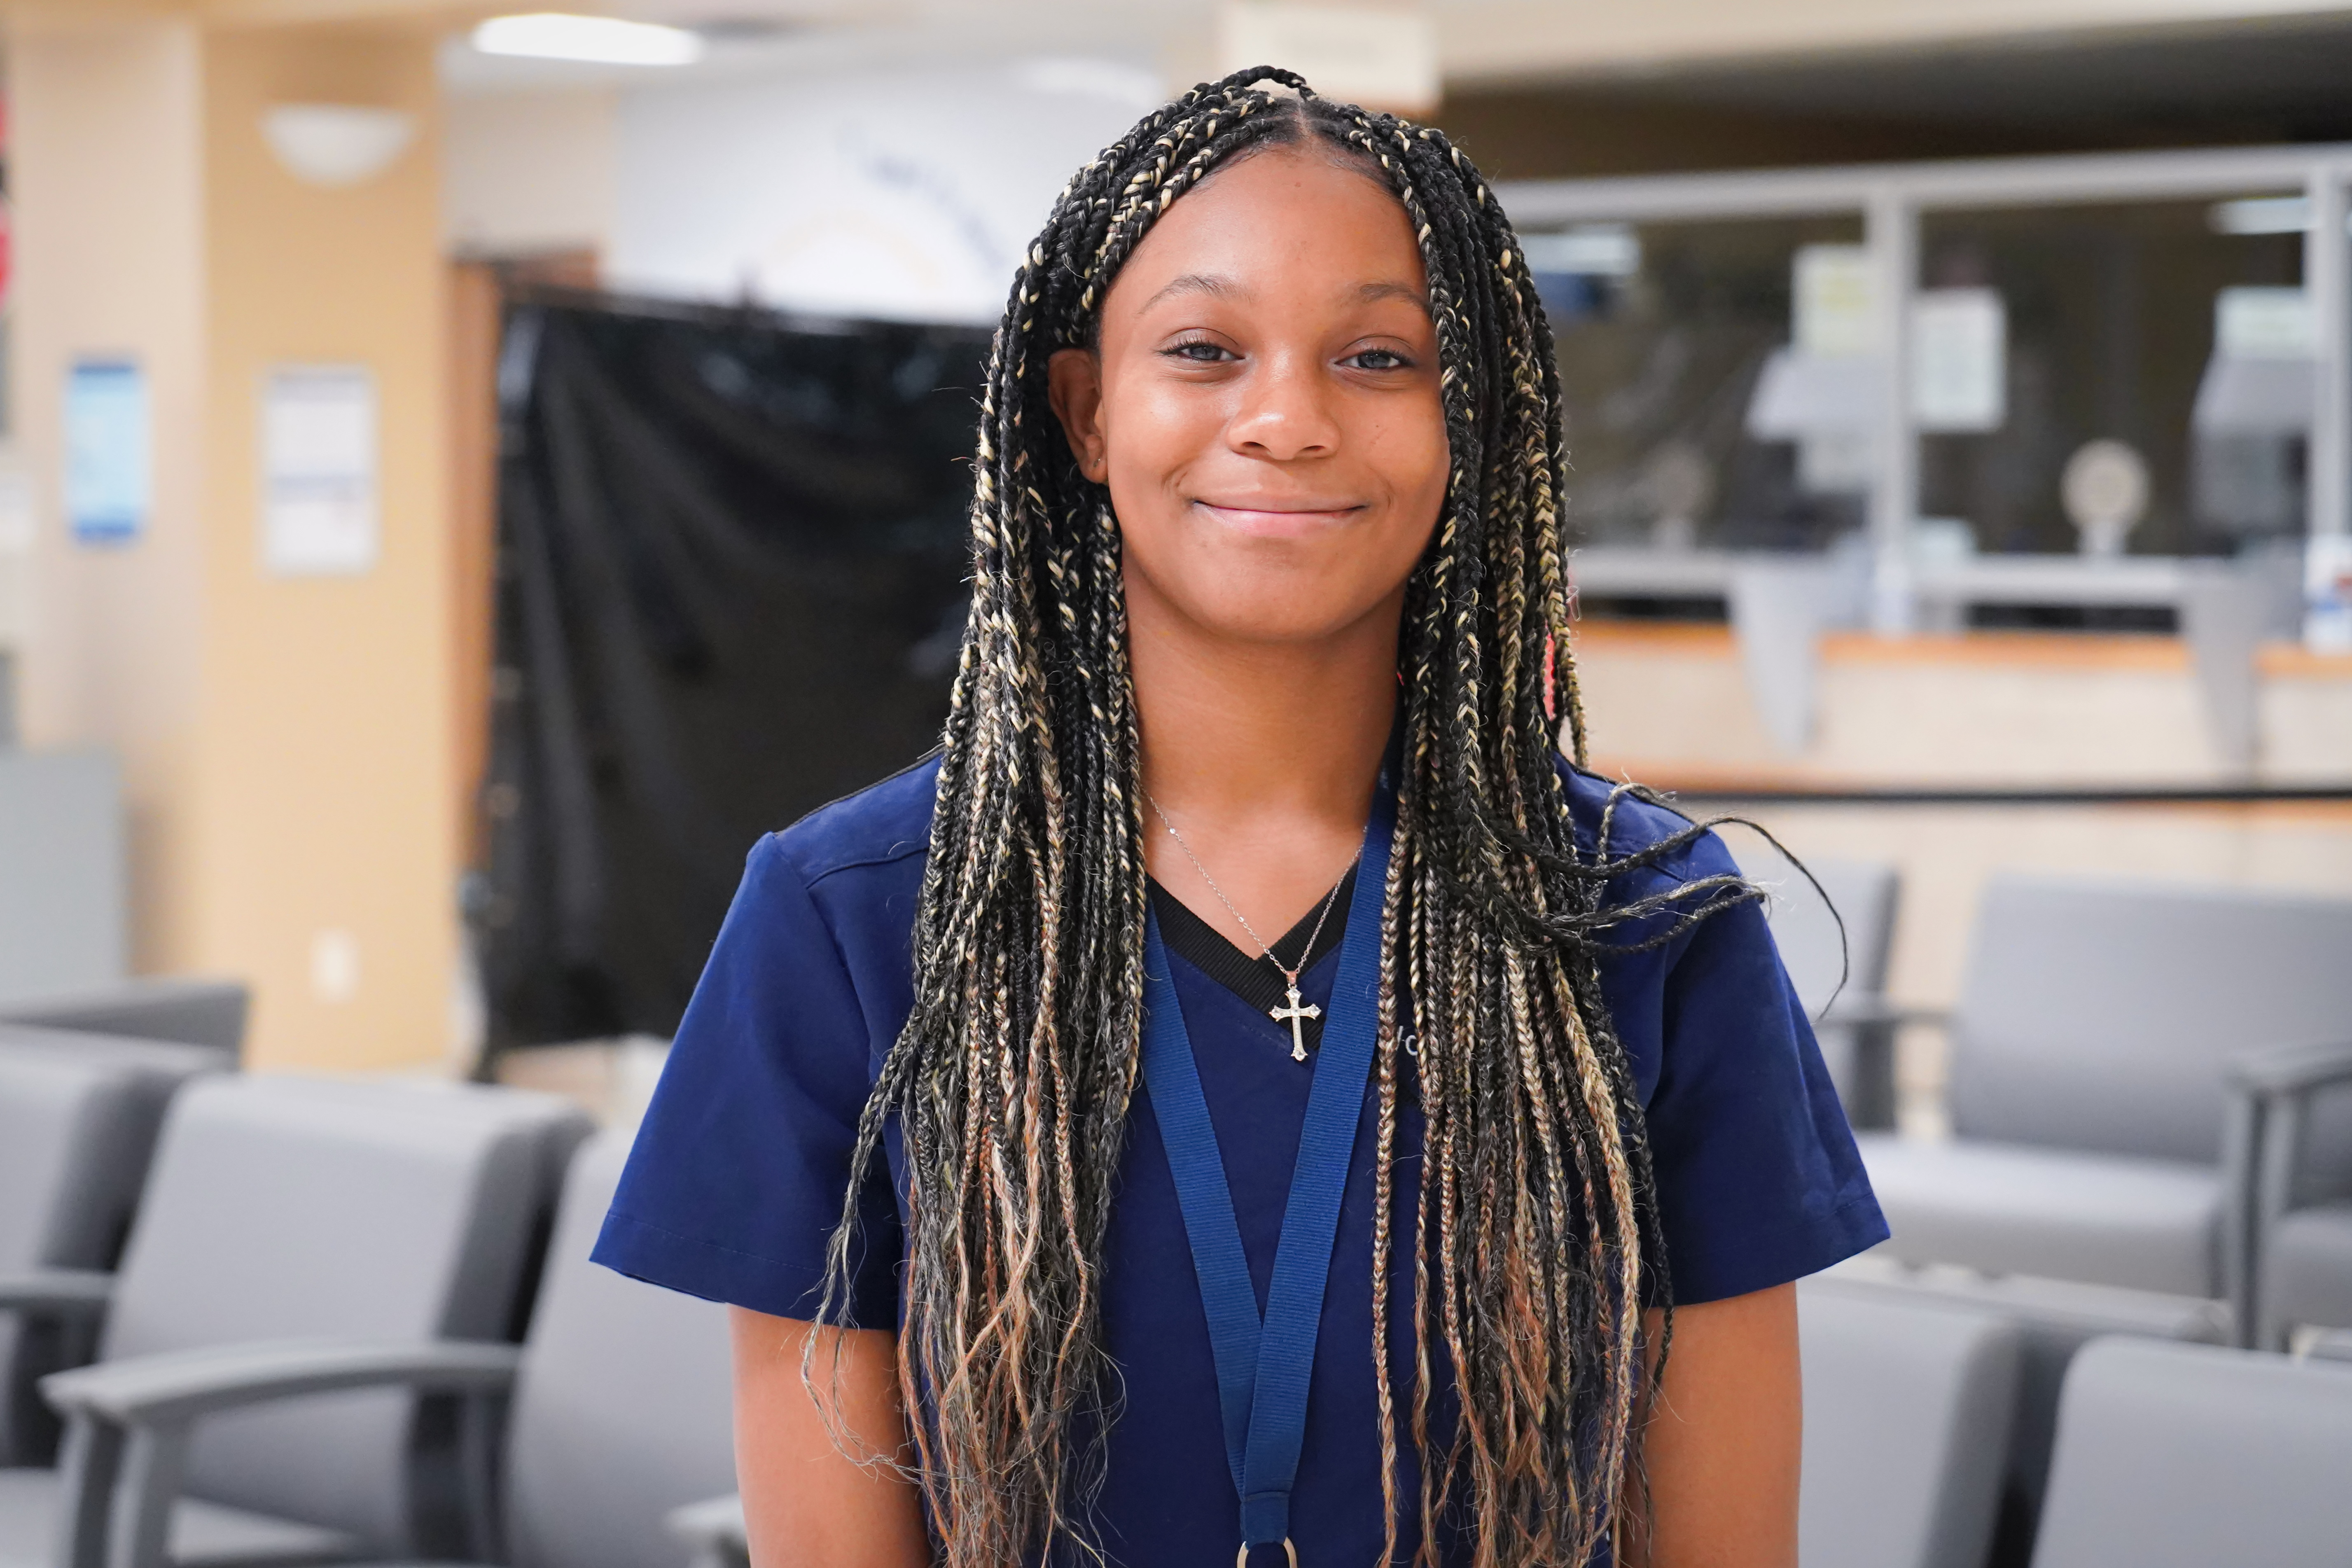 Brianna Lawrence is a student volunteer at the Brant Community Healthcare System.